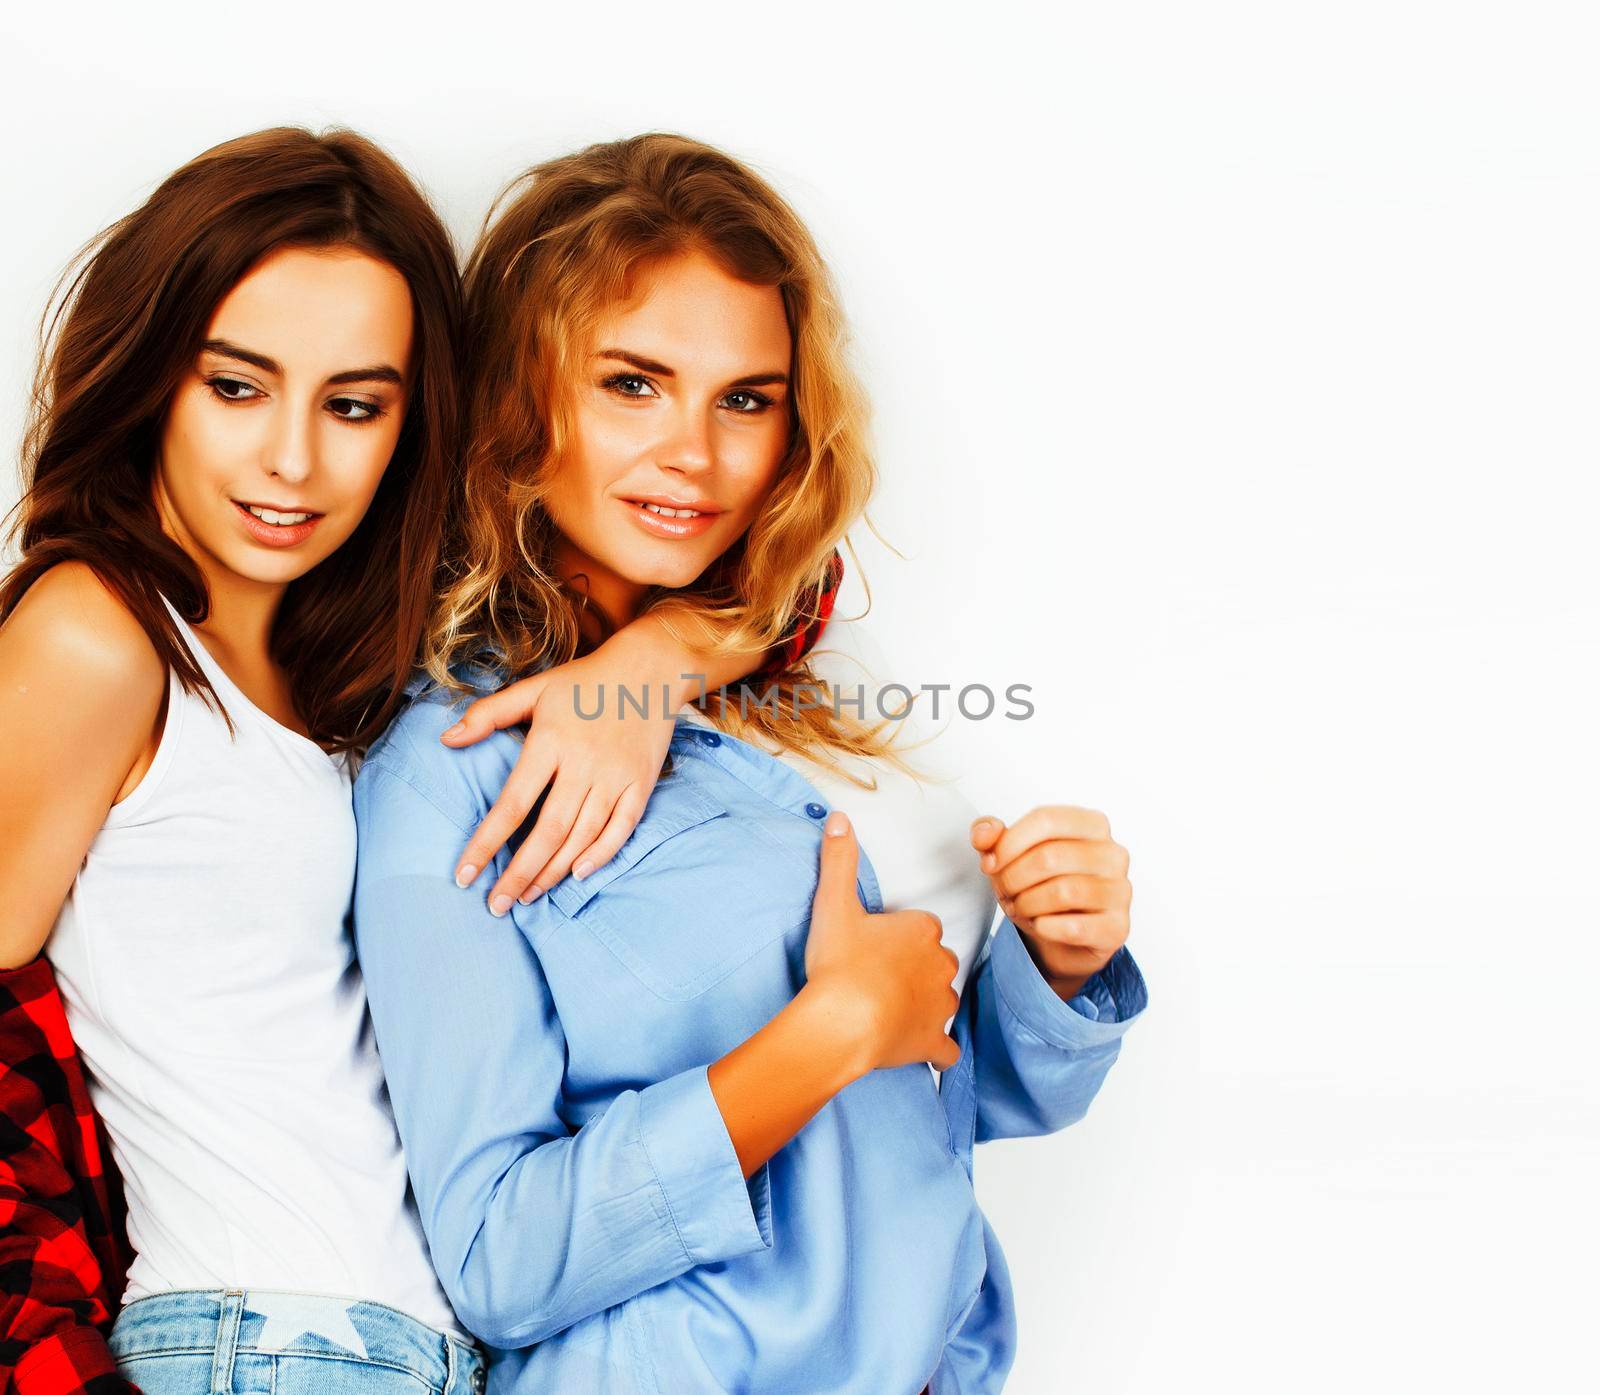 best friends teenage girls together having fun, posing emotional on white background, besties happy smiling, lifestyle real people concept close up. making selfie closeup